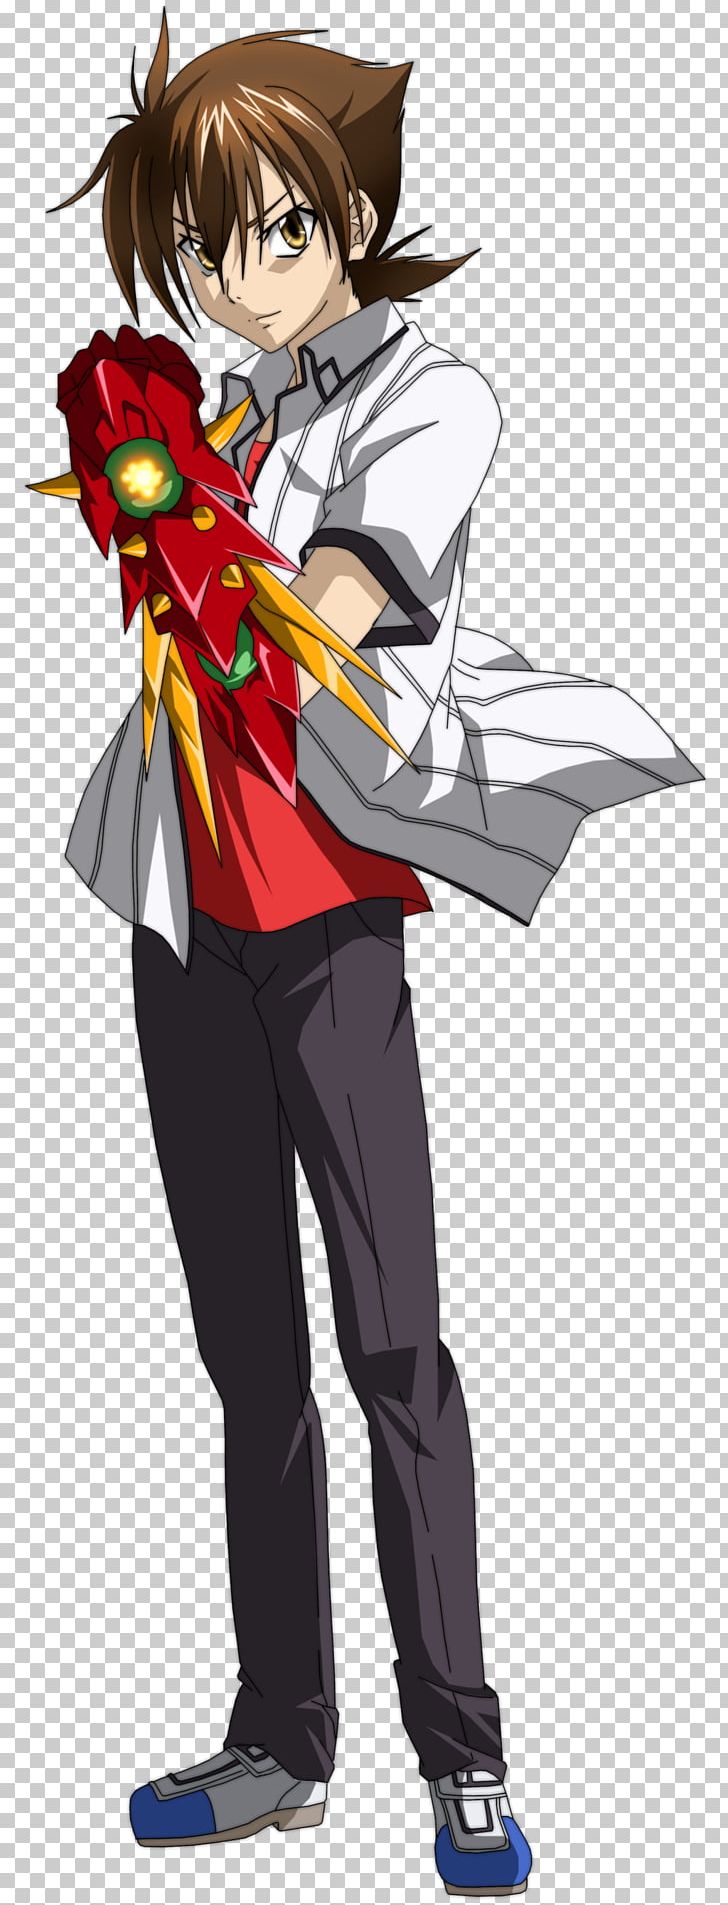 High School DxD Rias Gremory Anime PNG, Clipart, Anime, Cartoon, Clothing, Costume, Deviantart Free PNG Download